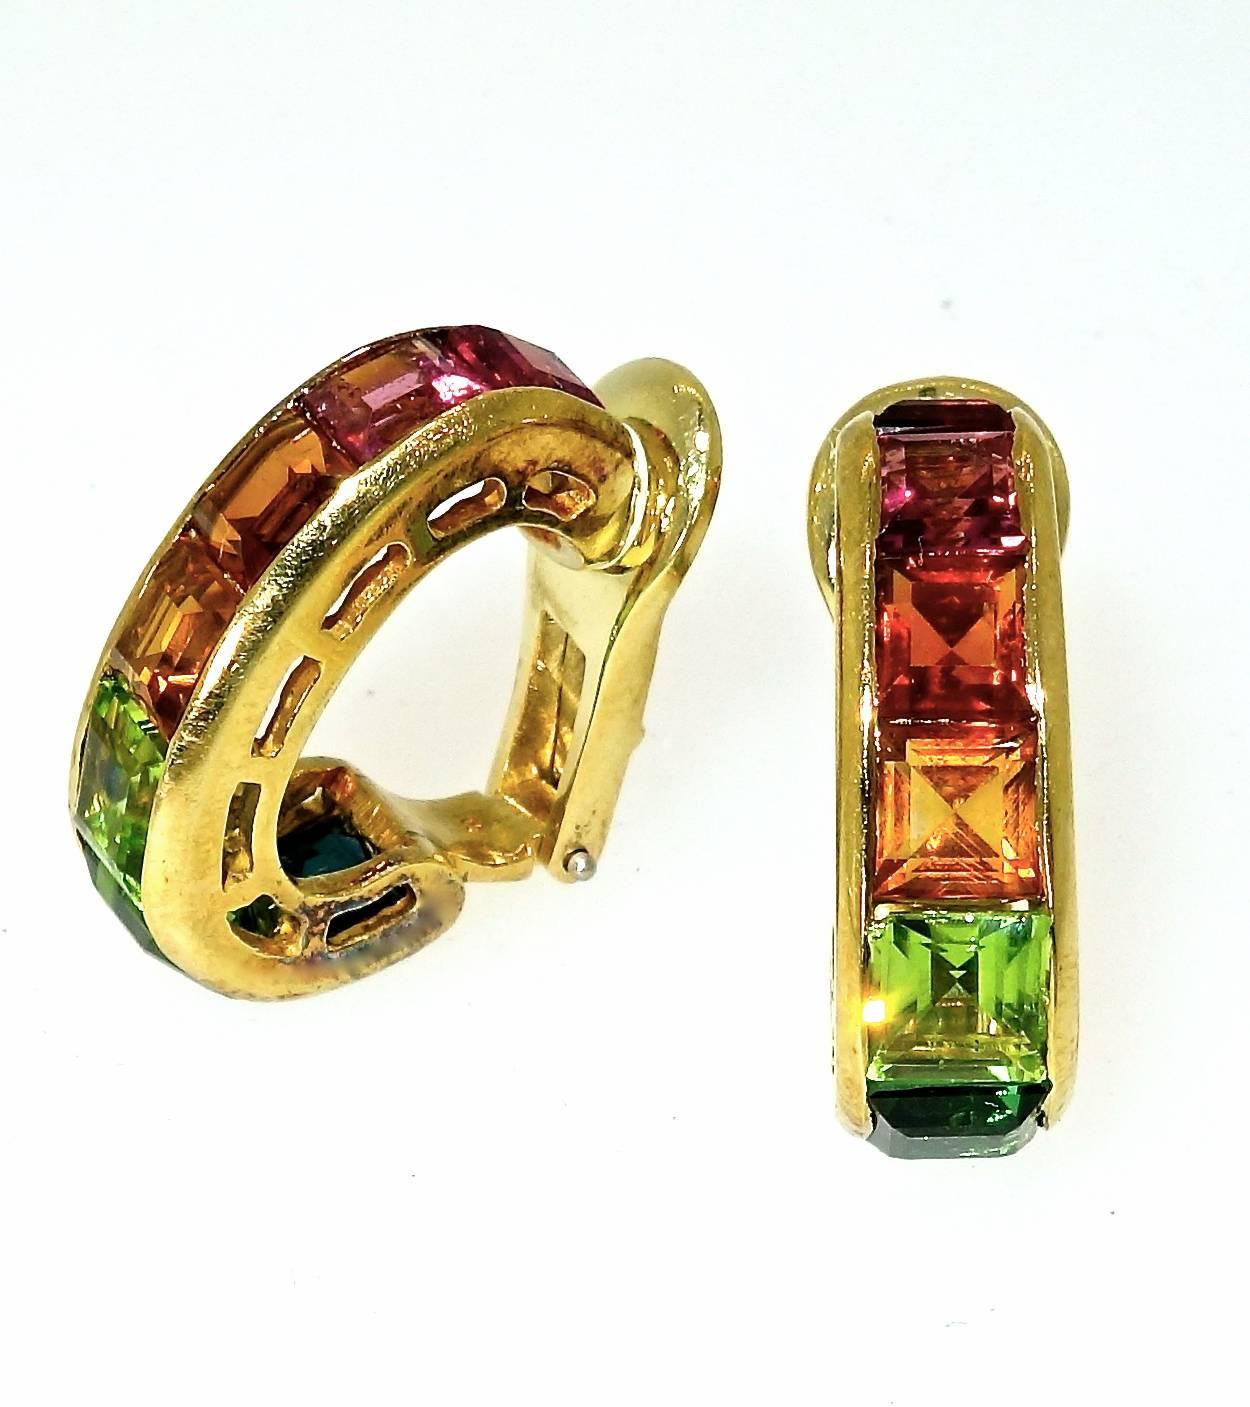 Tourmaline, citrine and peridot are channel set in 18K gold.  The square cut stones are all clean and bright creating vivid colors on the ear.  These earrings are .75 inches long and are now for a non-pierced ear.  We can easily convert them to a